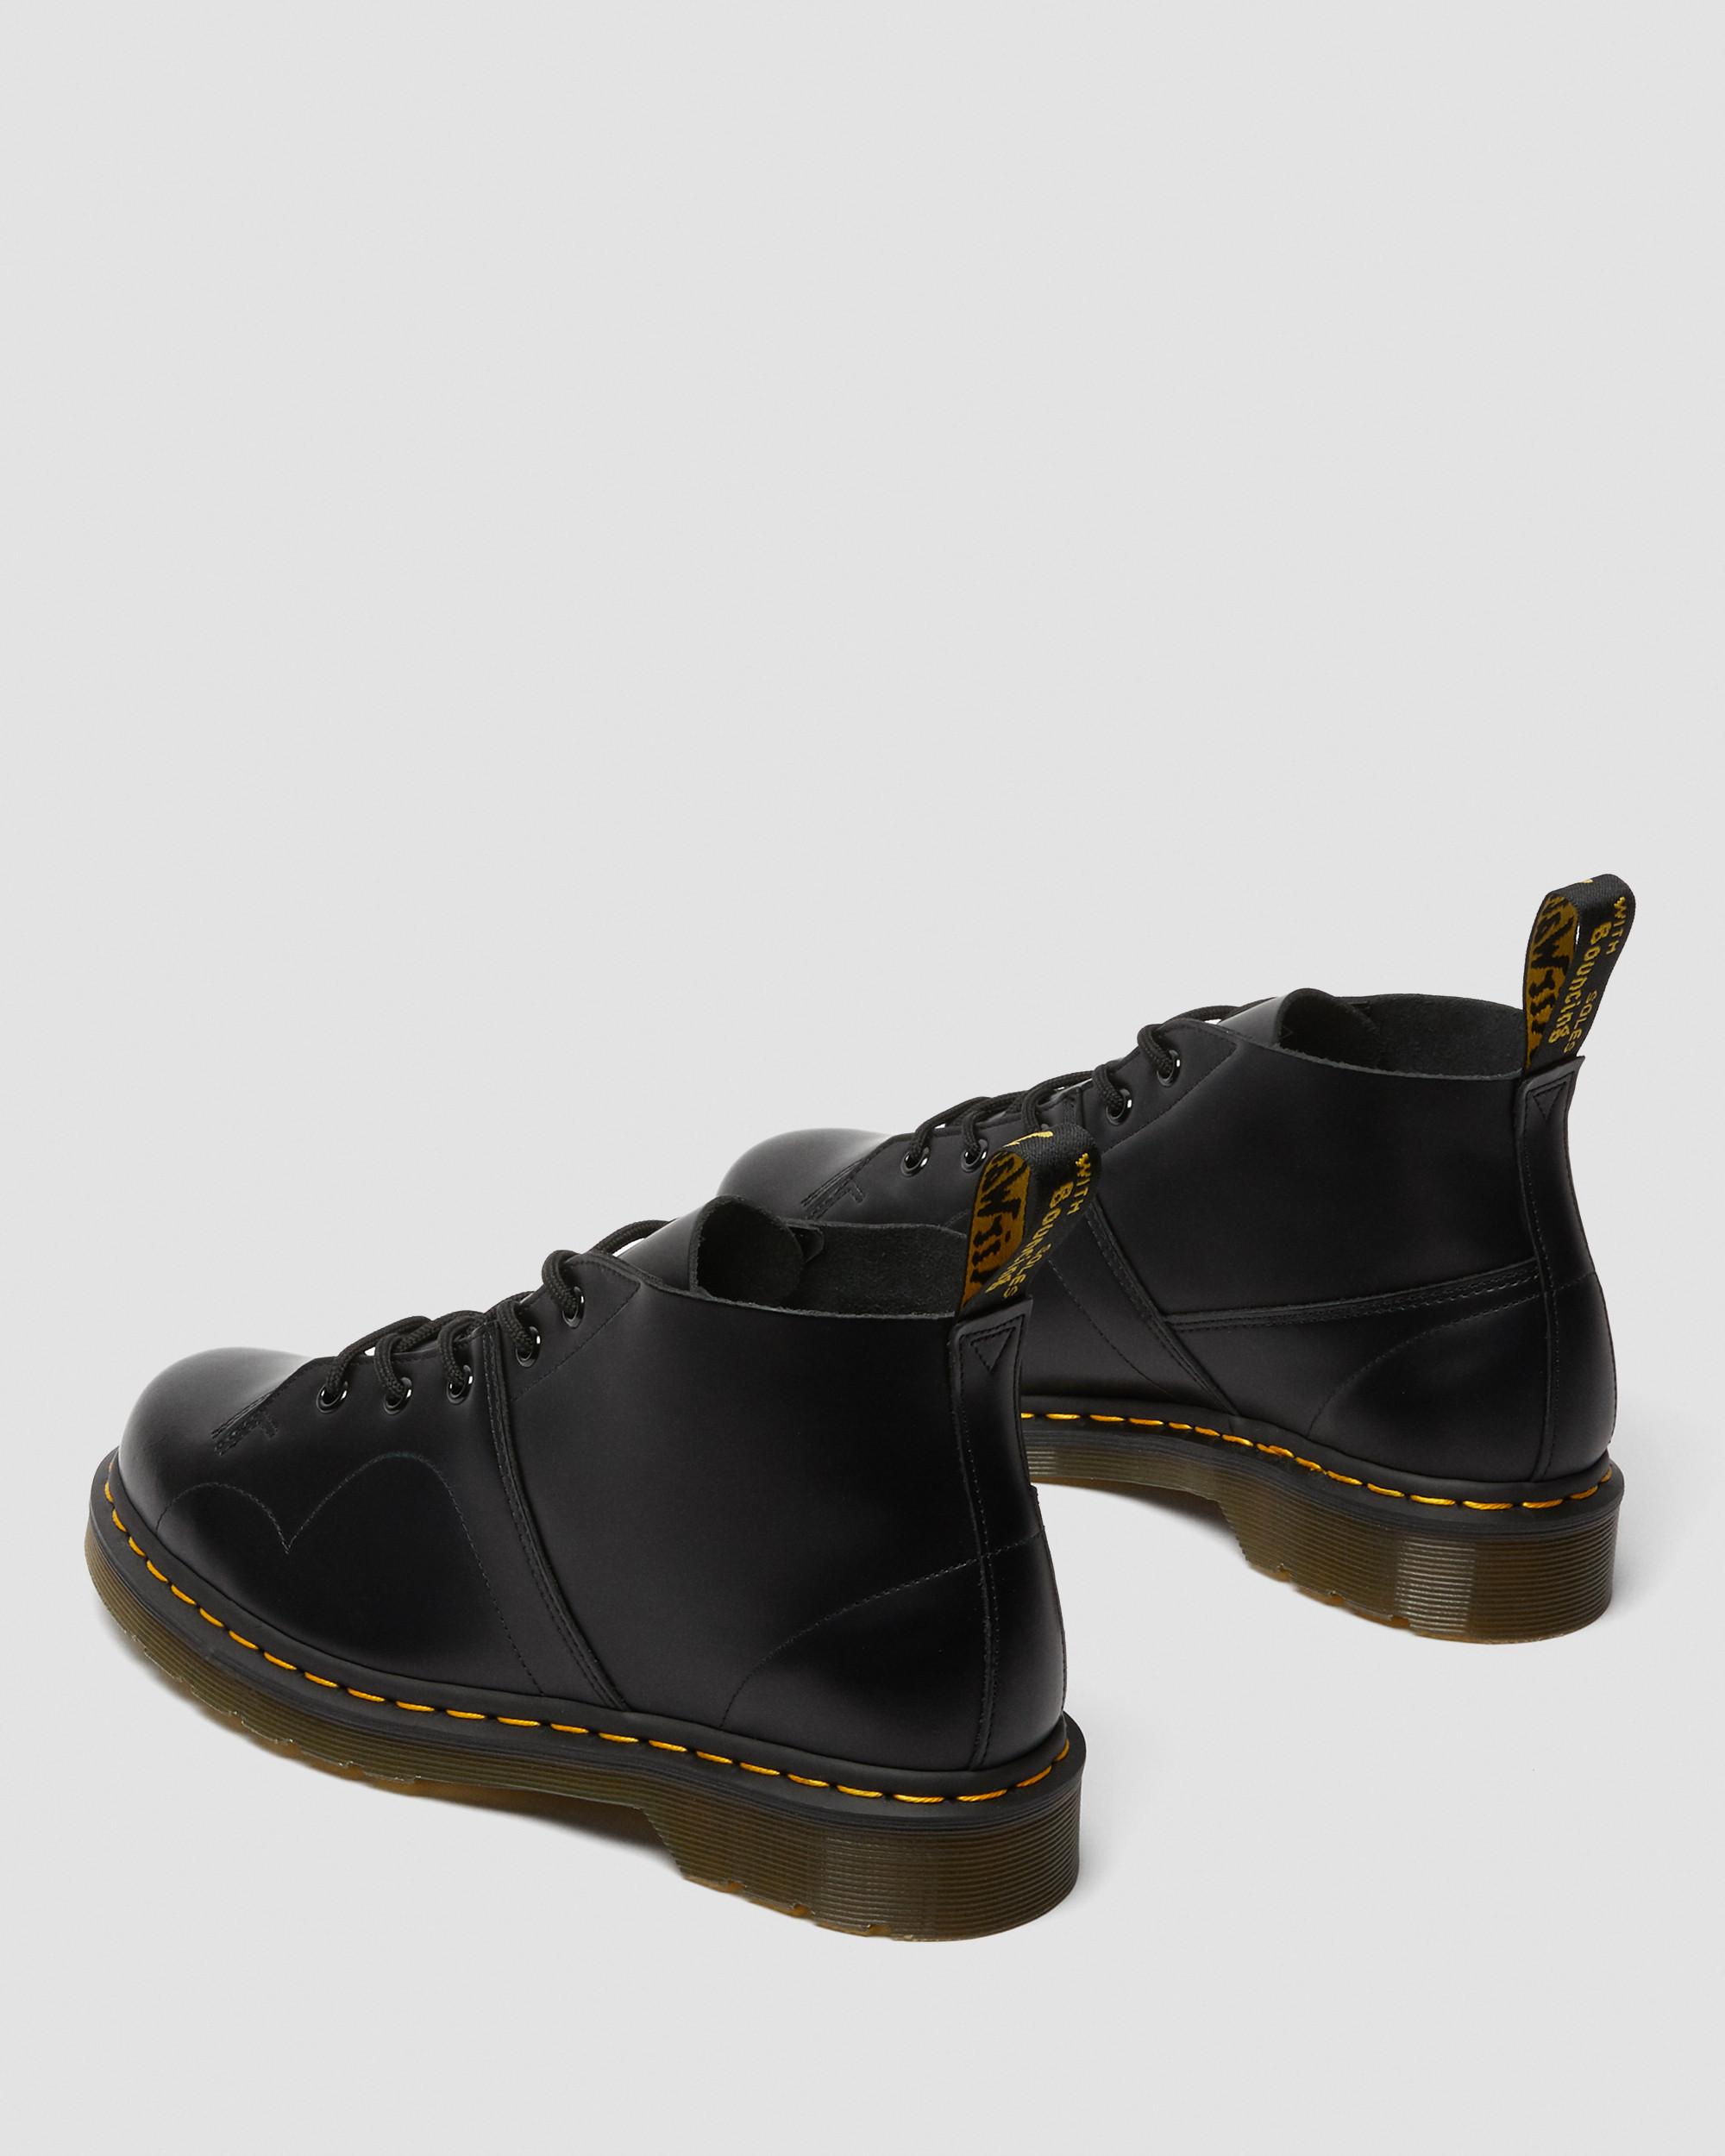 Dr Womens Shoes Boots Ankle boots Martens Leather Dr Martens Church Monkey Smooth Boots in Black 